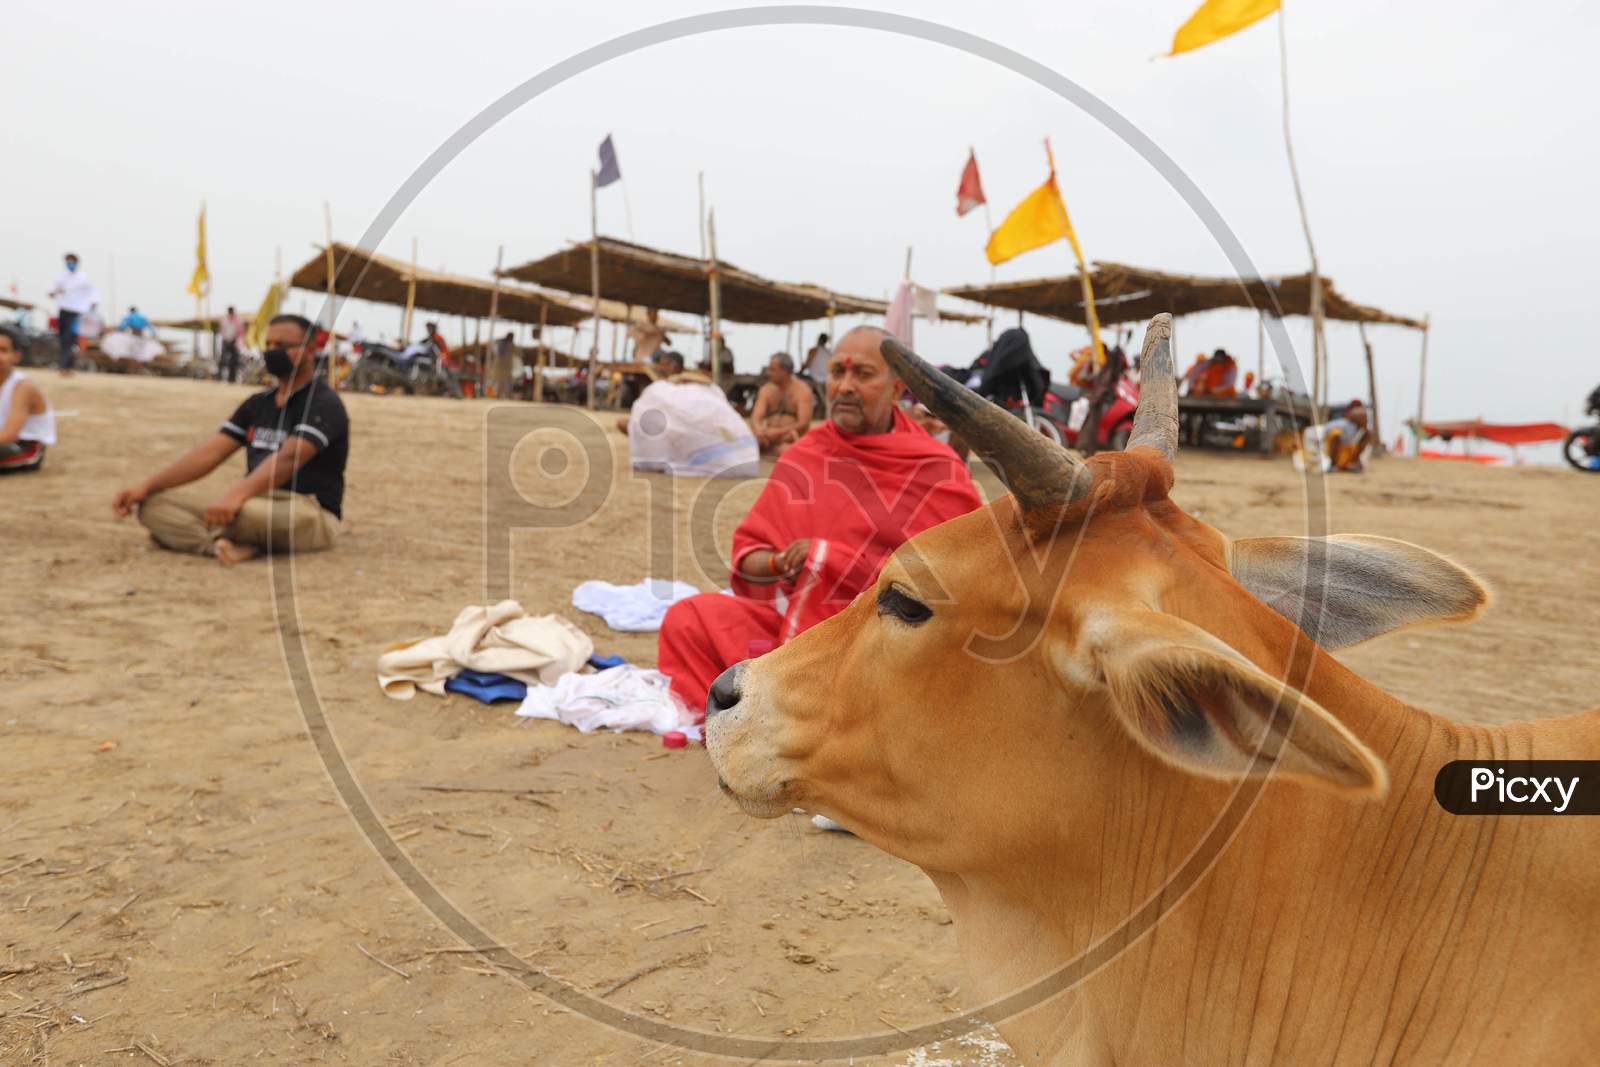 Hindu Devotees Pray To The Sun God At The Sangam, The Confluence Of Three Rivers Ganges, Yamuna And Saraswati, During An Annular Solar Eclipse In Prayagraj, June 21, 2020.